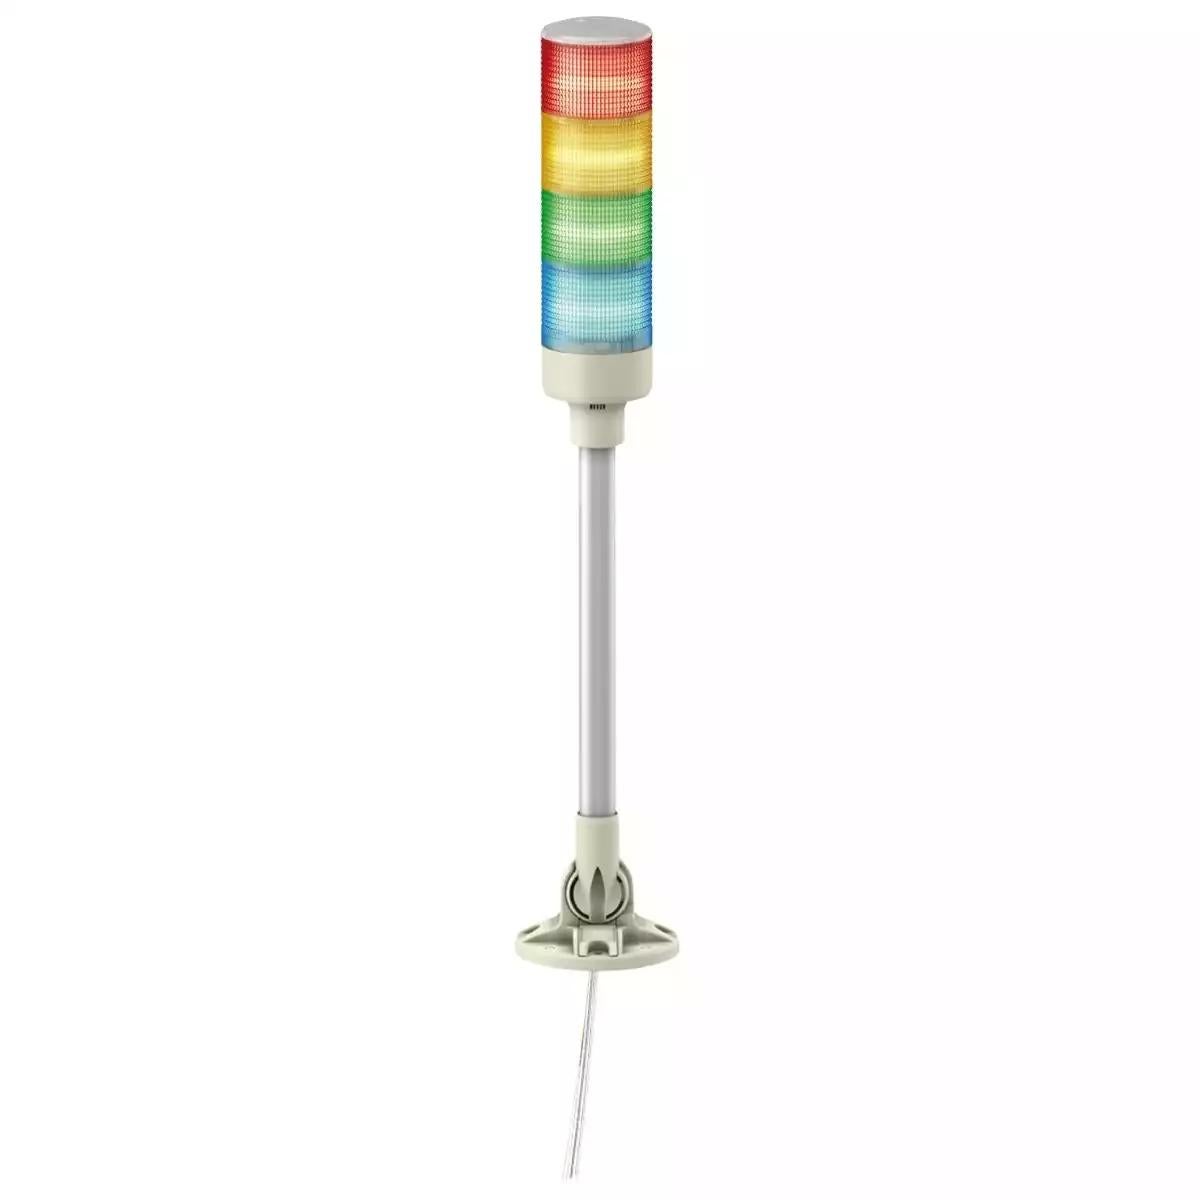 Schneider Electric Harmony XVG Tower Light - RAGB - 24V - LED - Tube mounting with foldable bracket